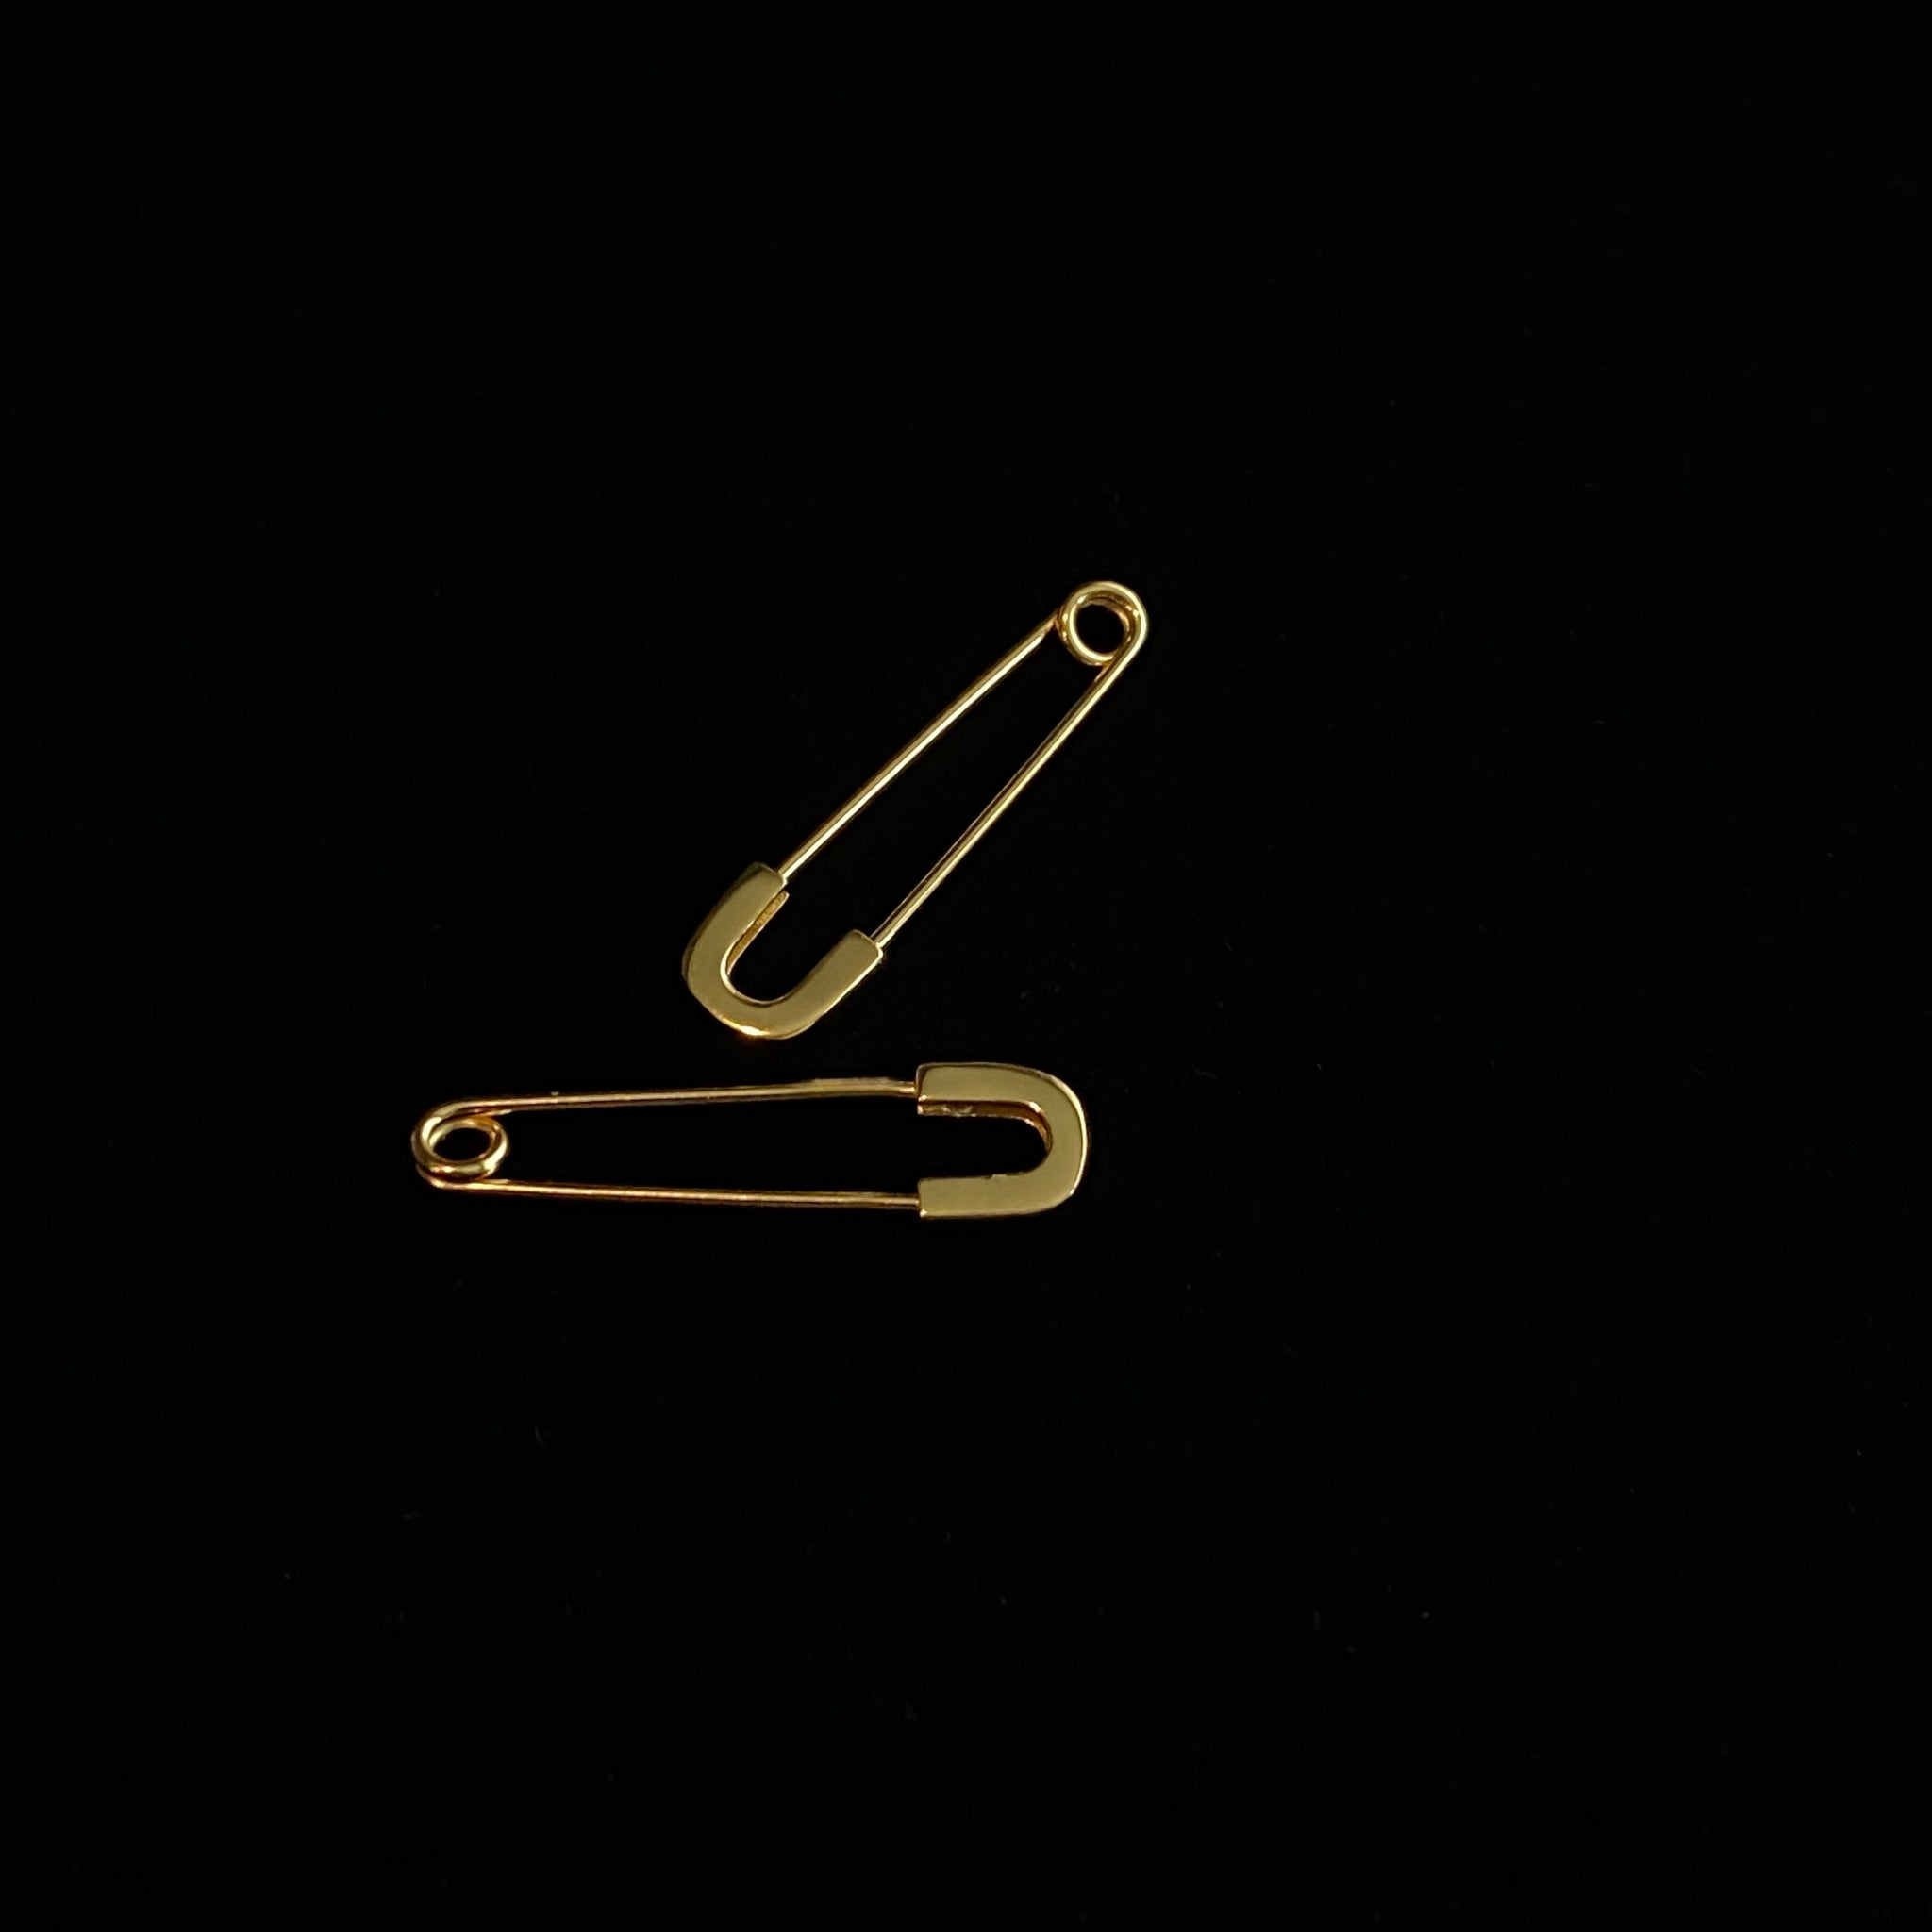 Gold Safety Pin Earrings